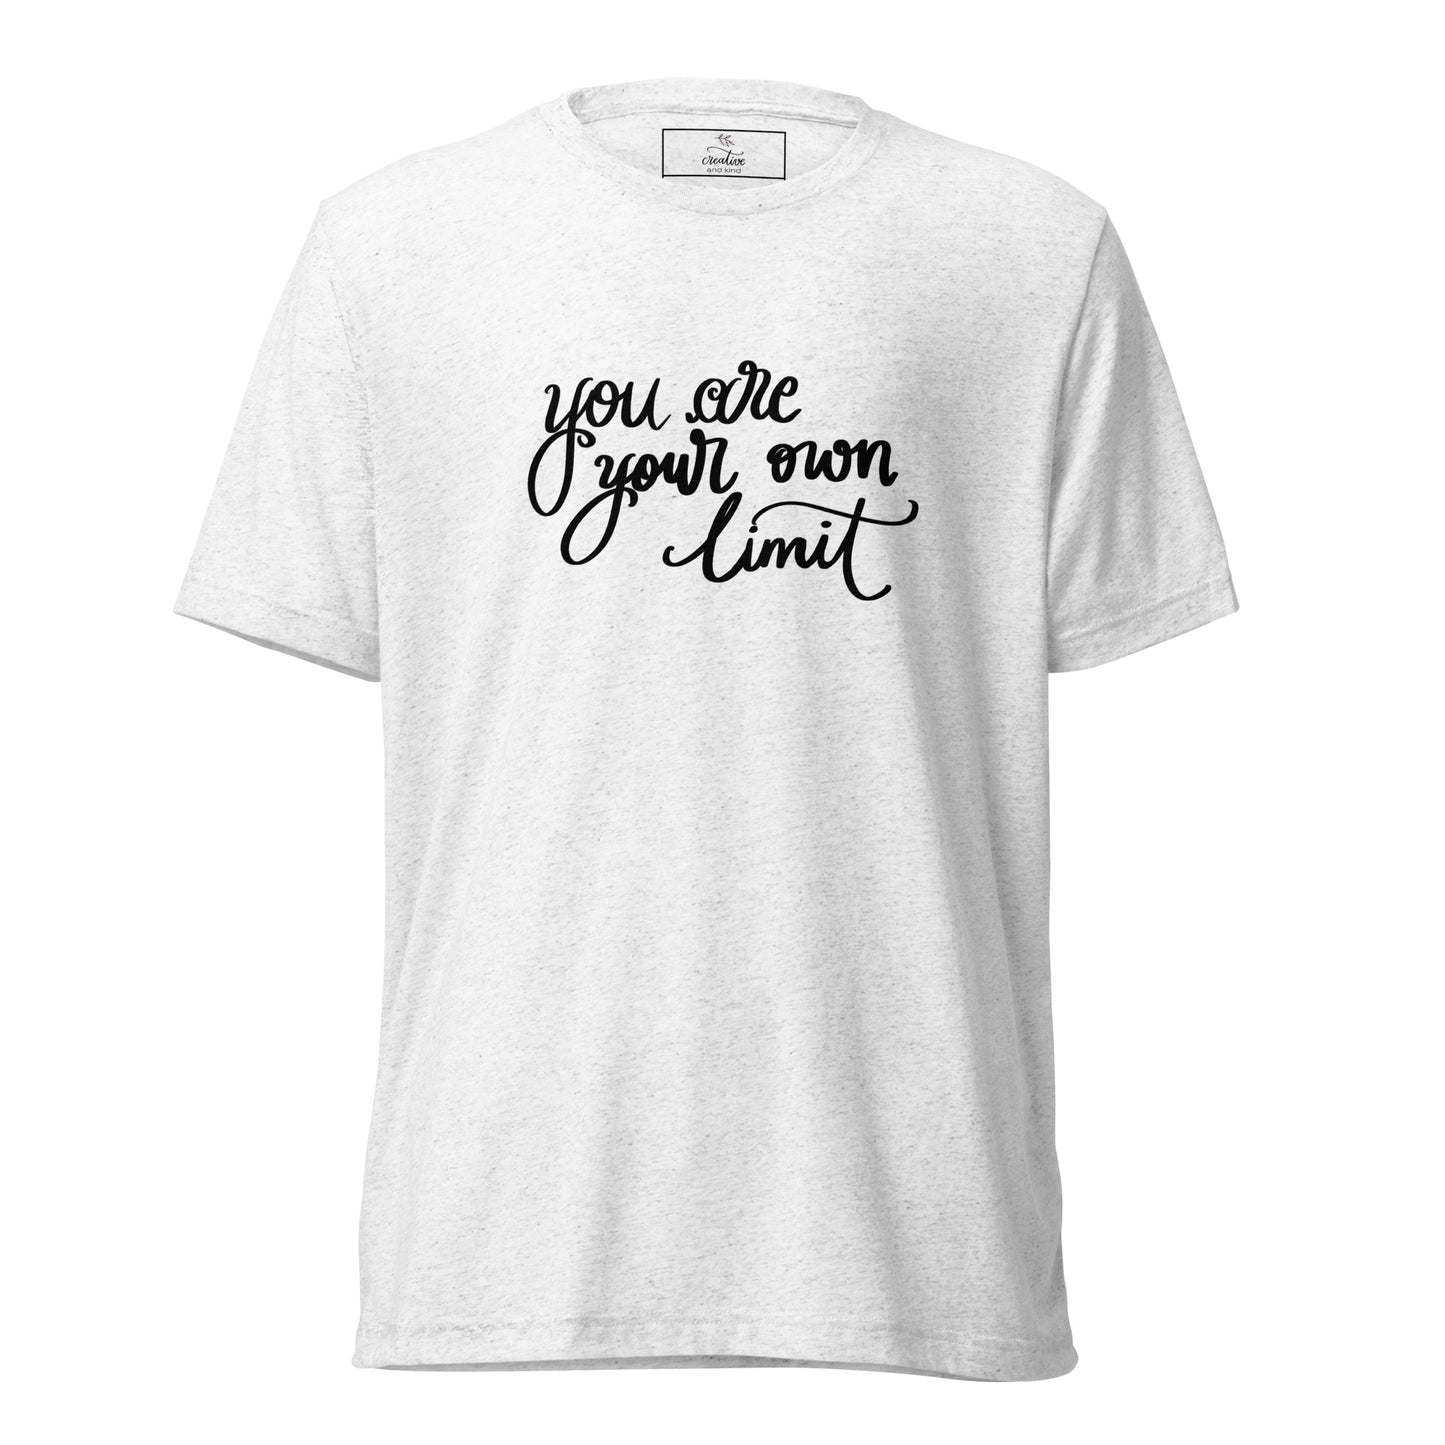 Short sleeve t-shirt "you are your own limit"